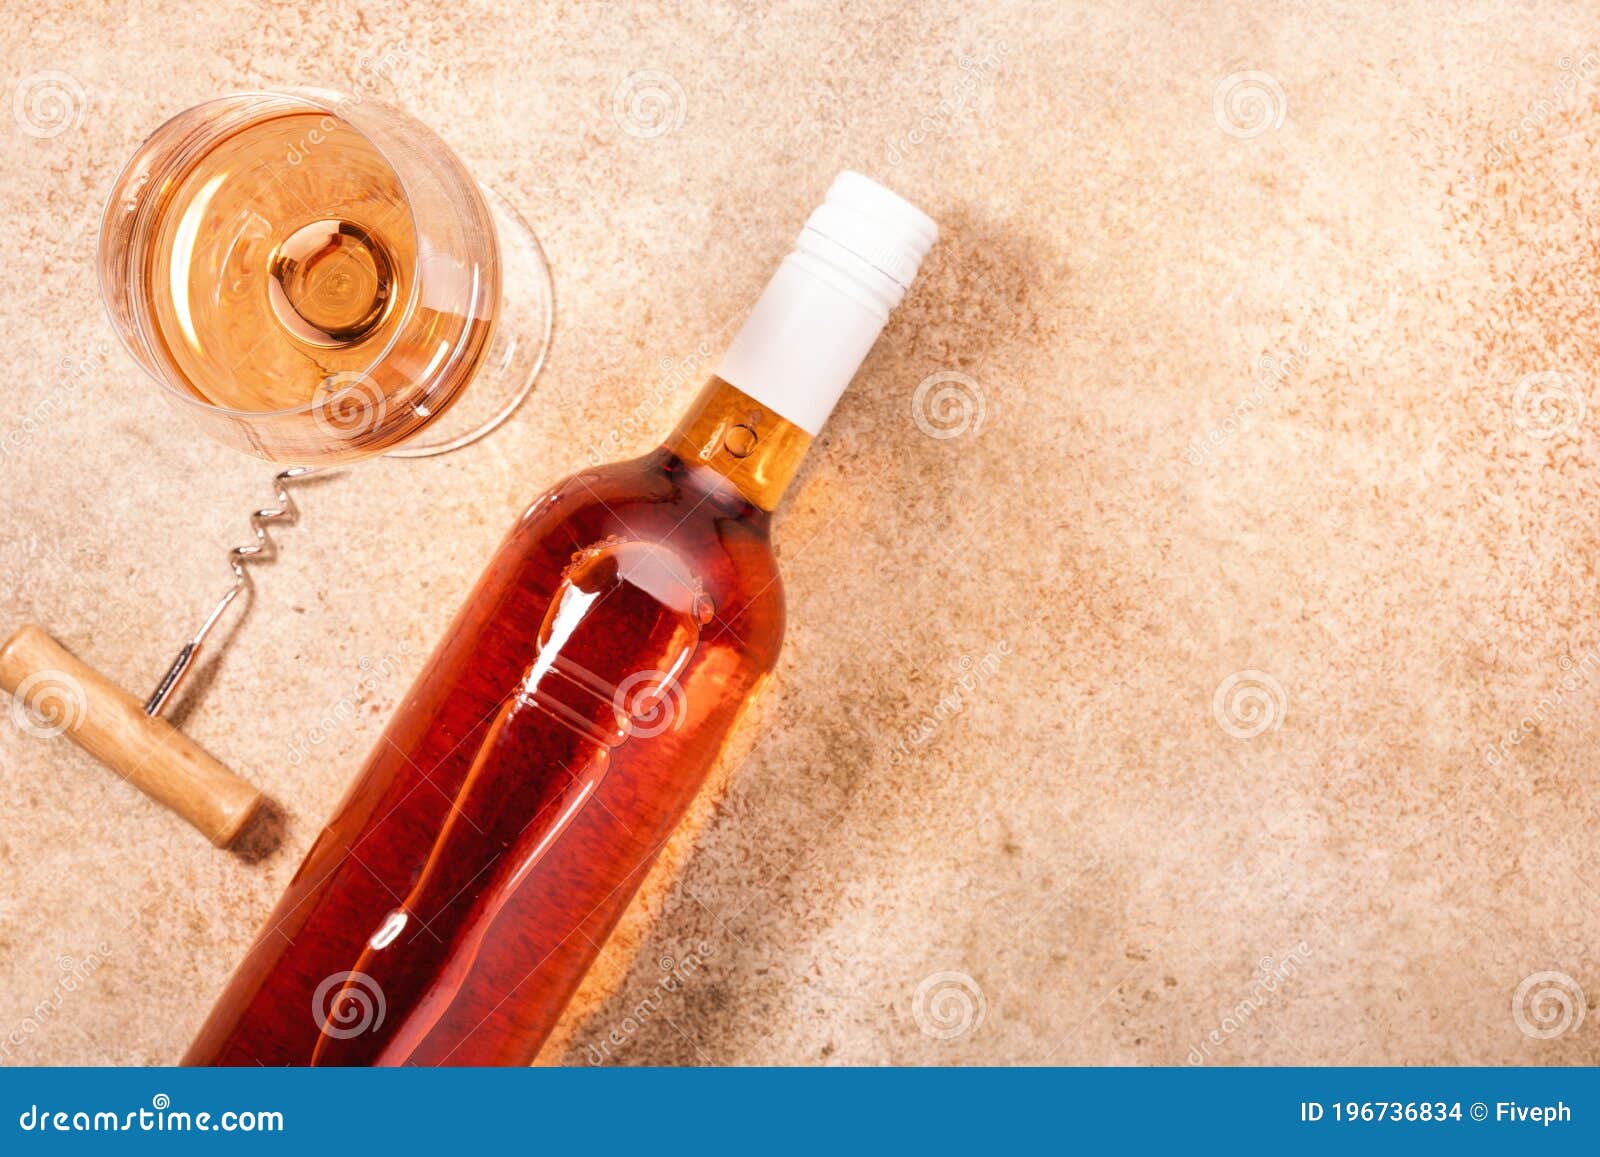 rose wine glass with bottle on the beige table. rosado, rosato or blush wine tasting in wineshop, bar concept. copy space, top